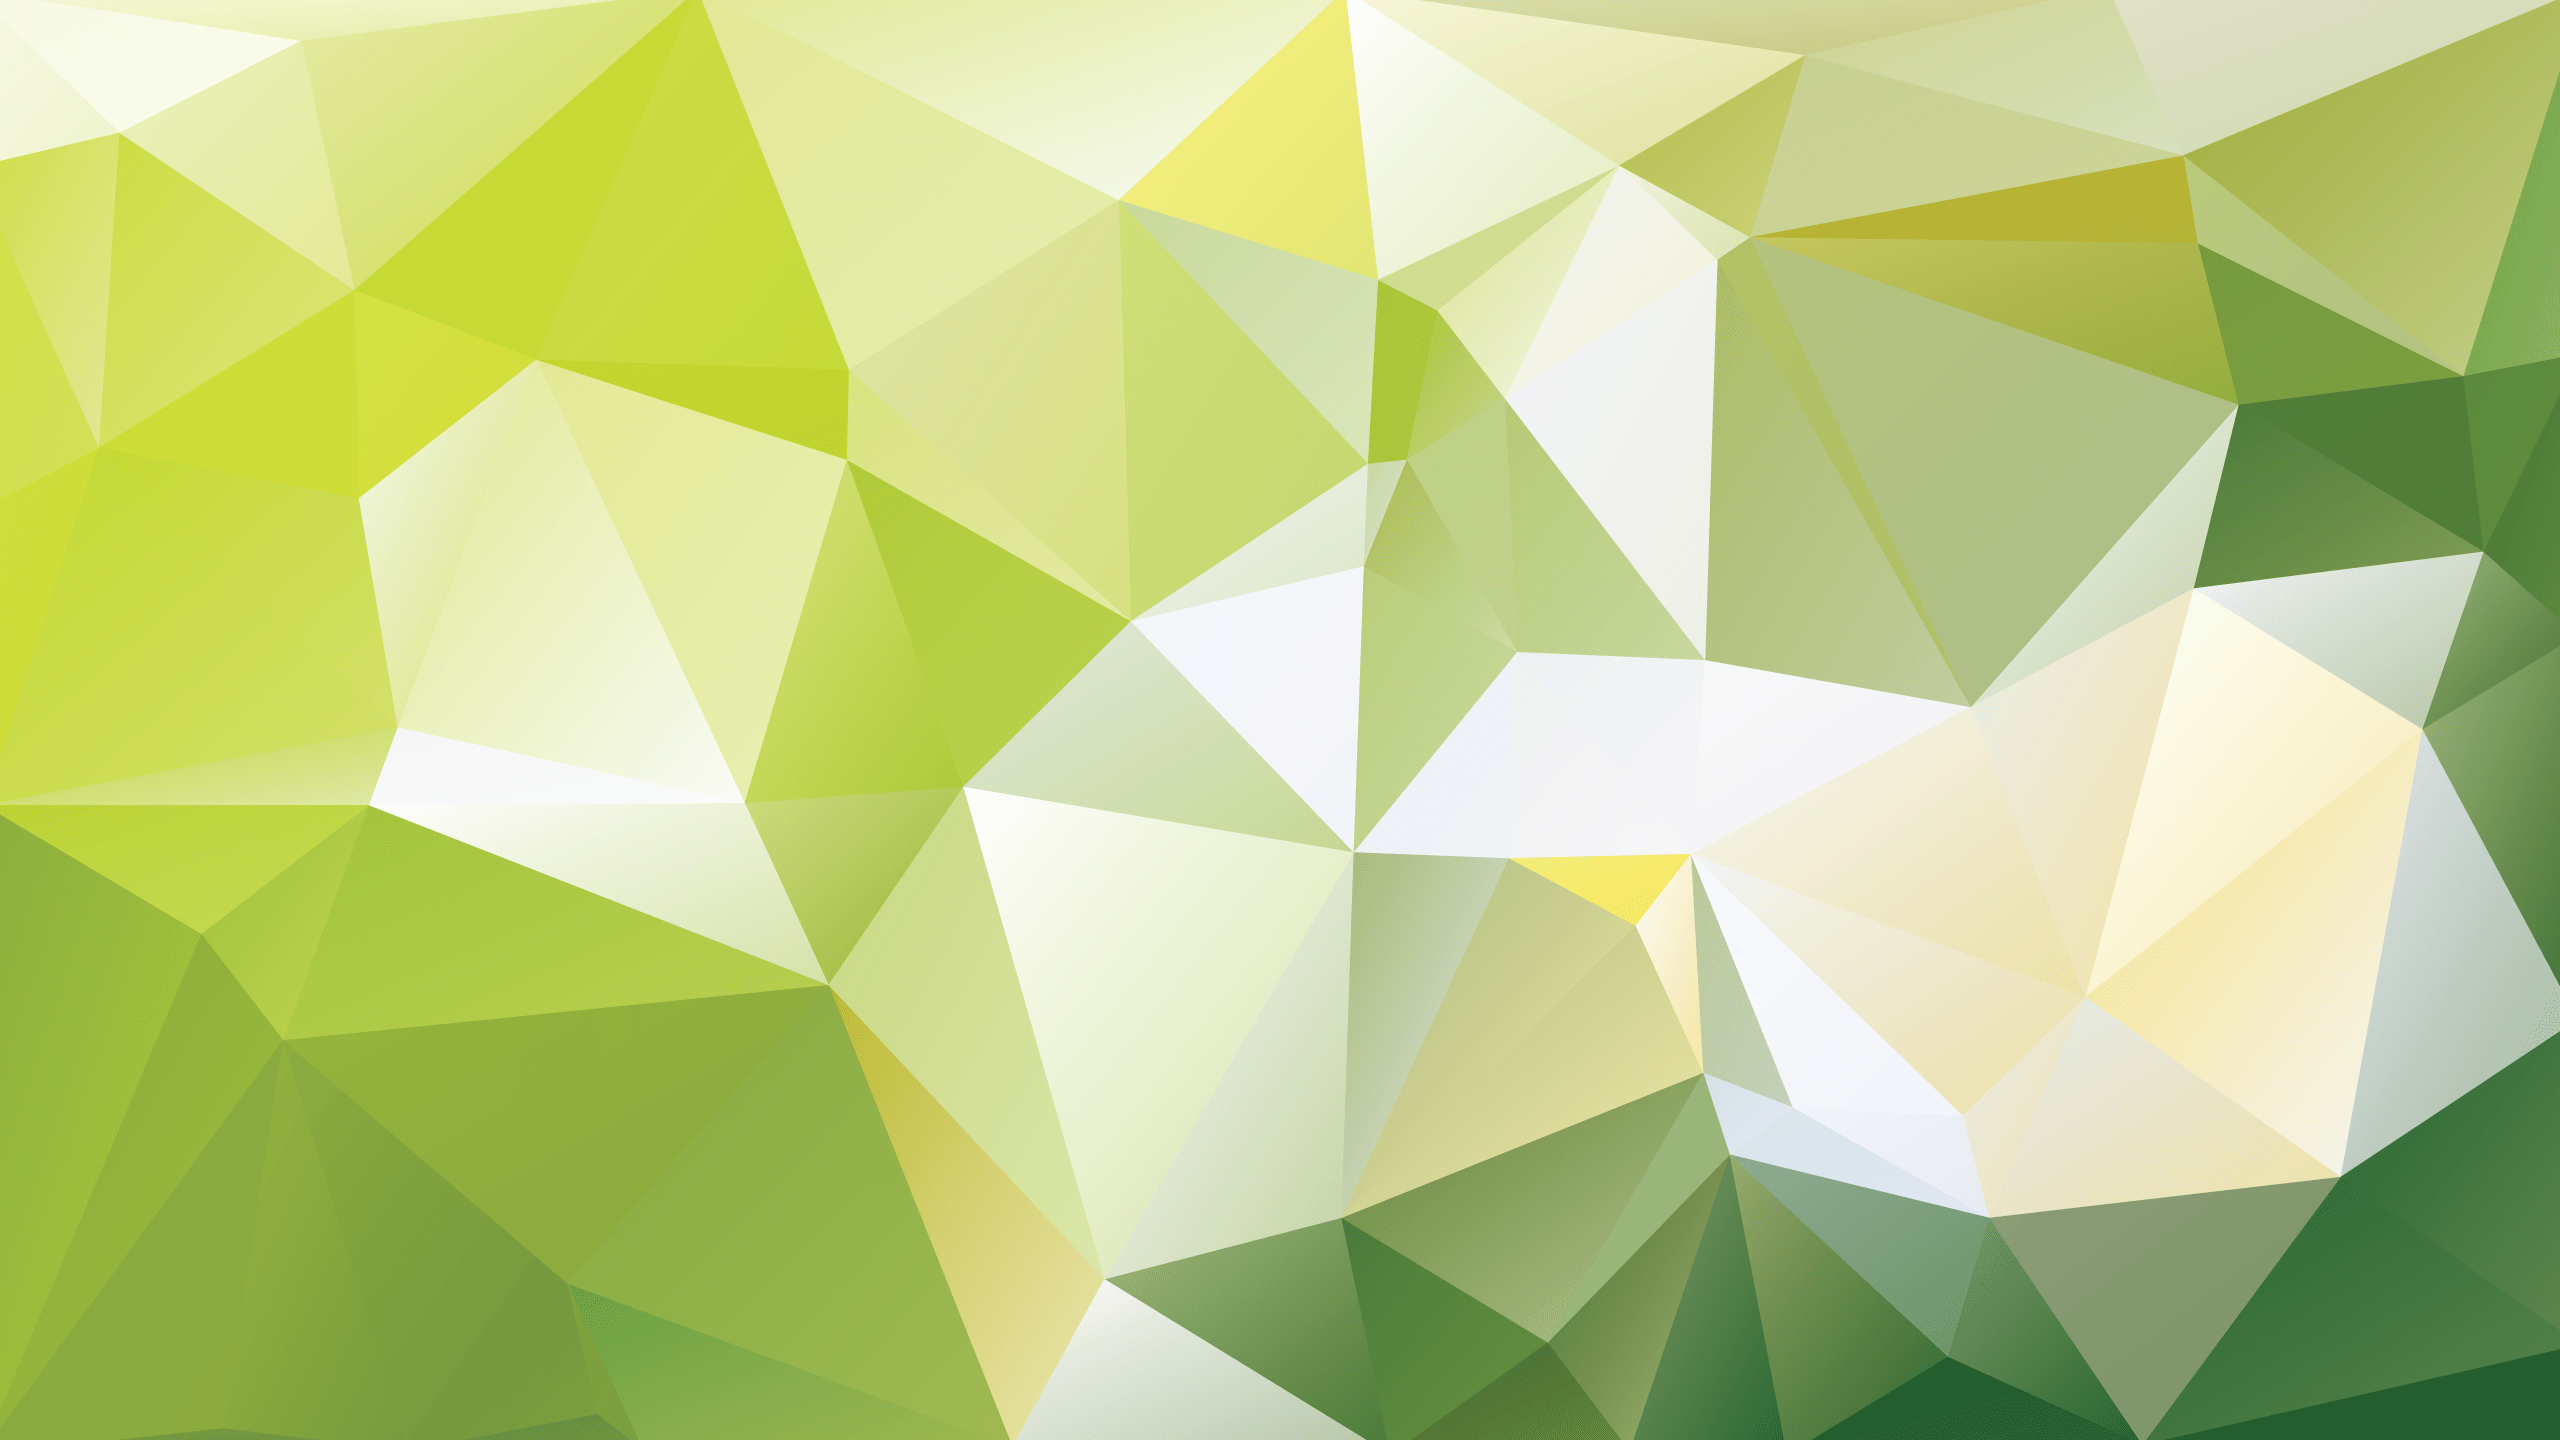 Green with Yellow Triangle Logo - Wallpaper : illustration, symmetry, green, yellow, triangle, pattern